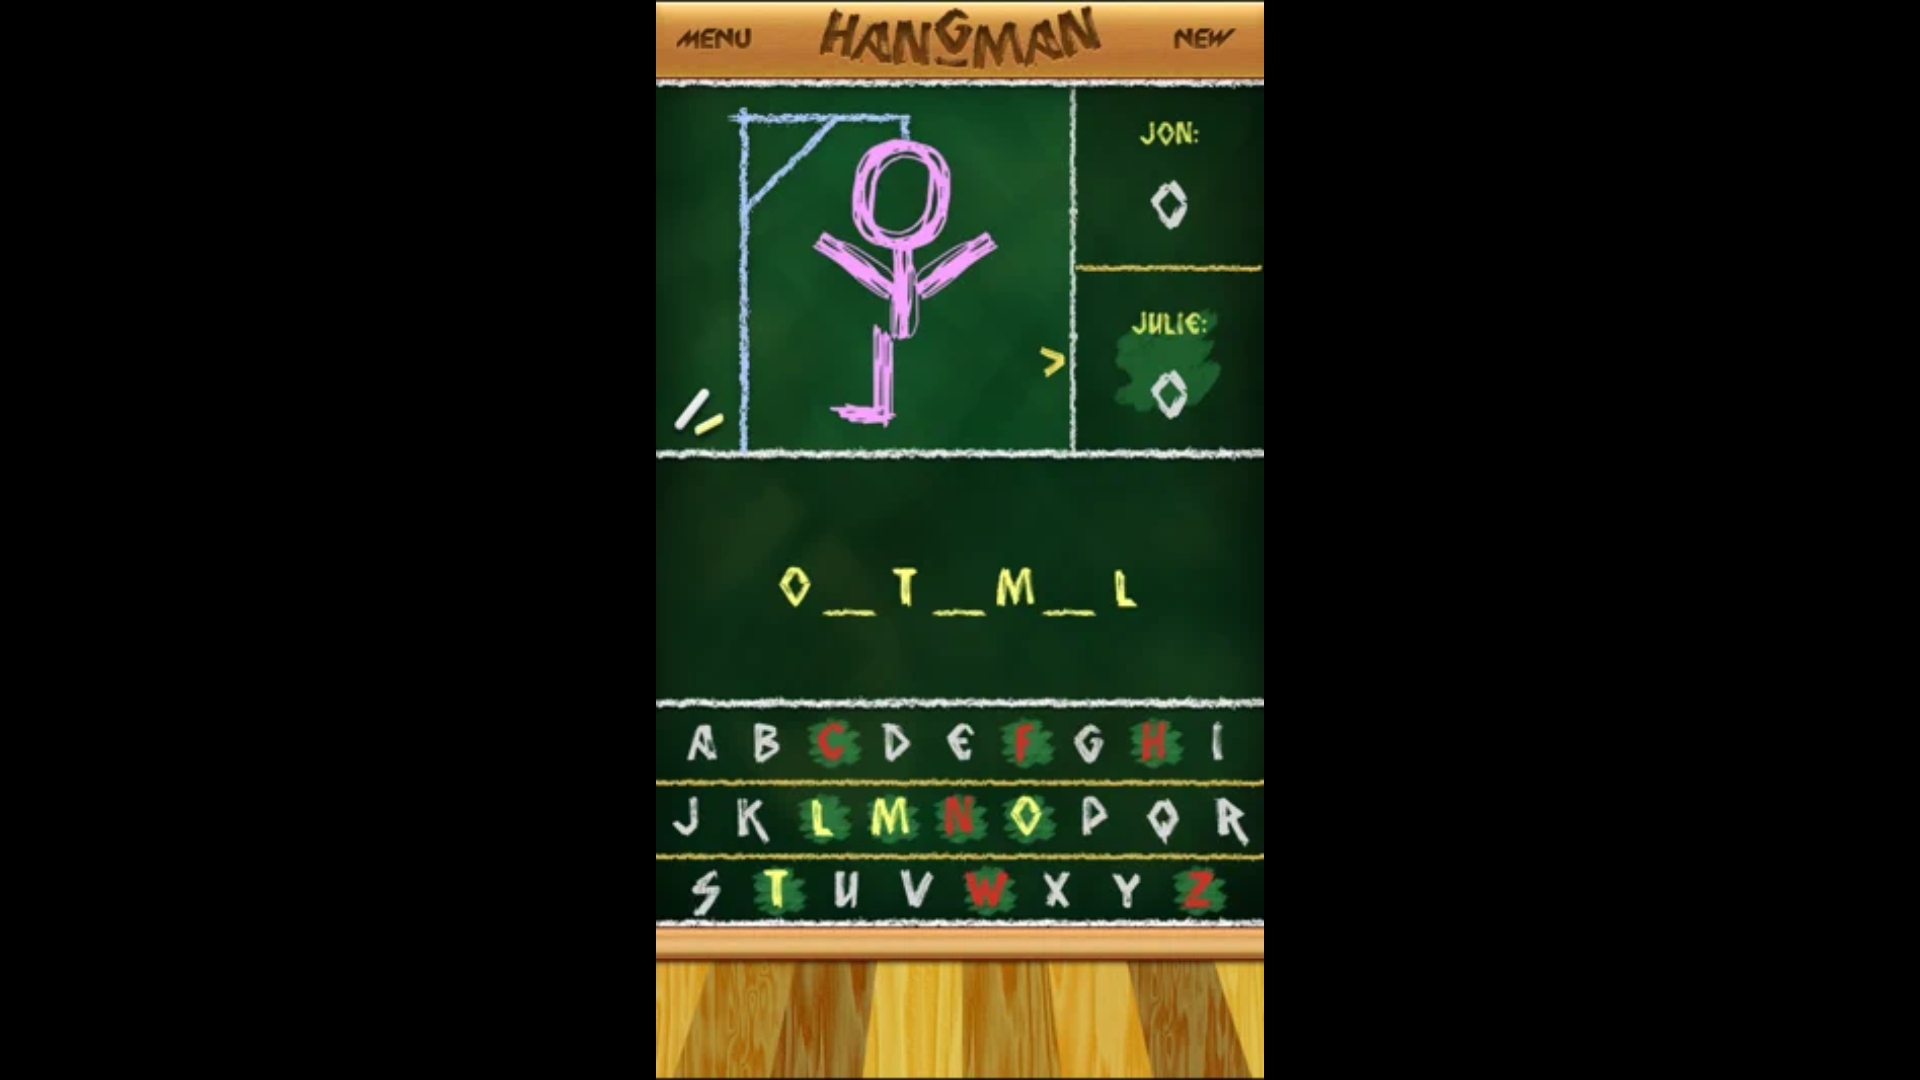 Best word games - Hangman. A screenshot shows someone who is still pretty far from guessing their word, but whose hangman is almost complete.